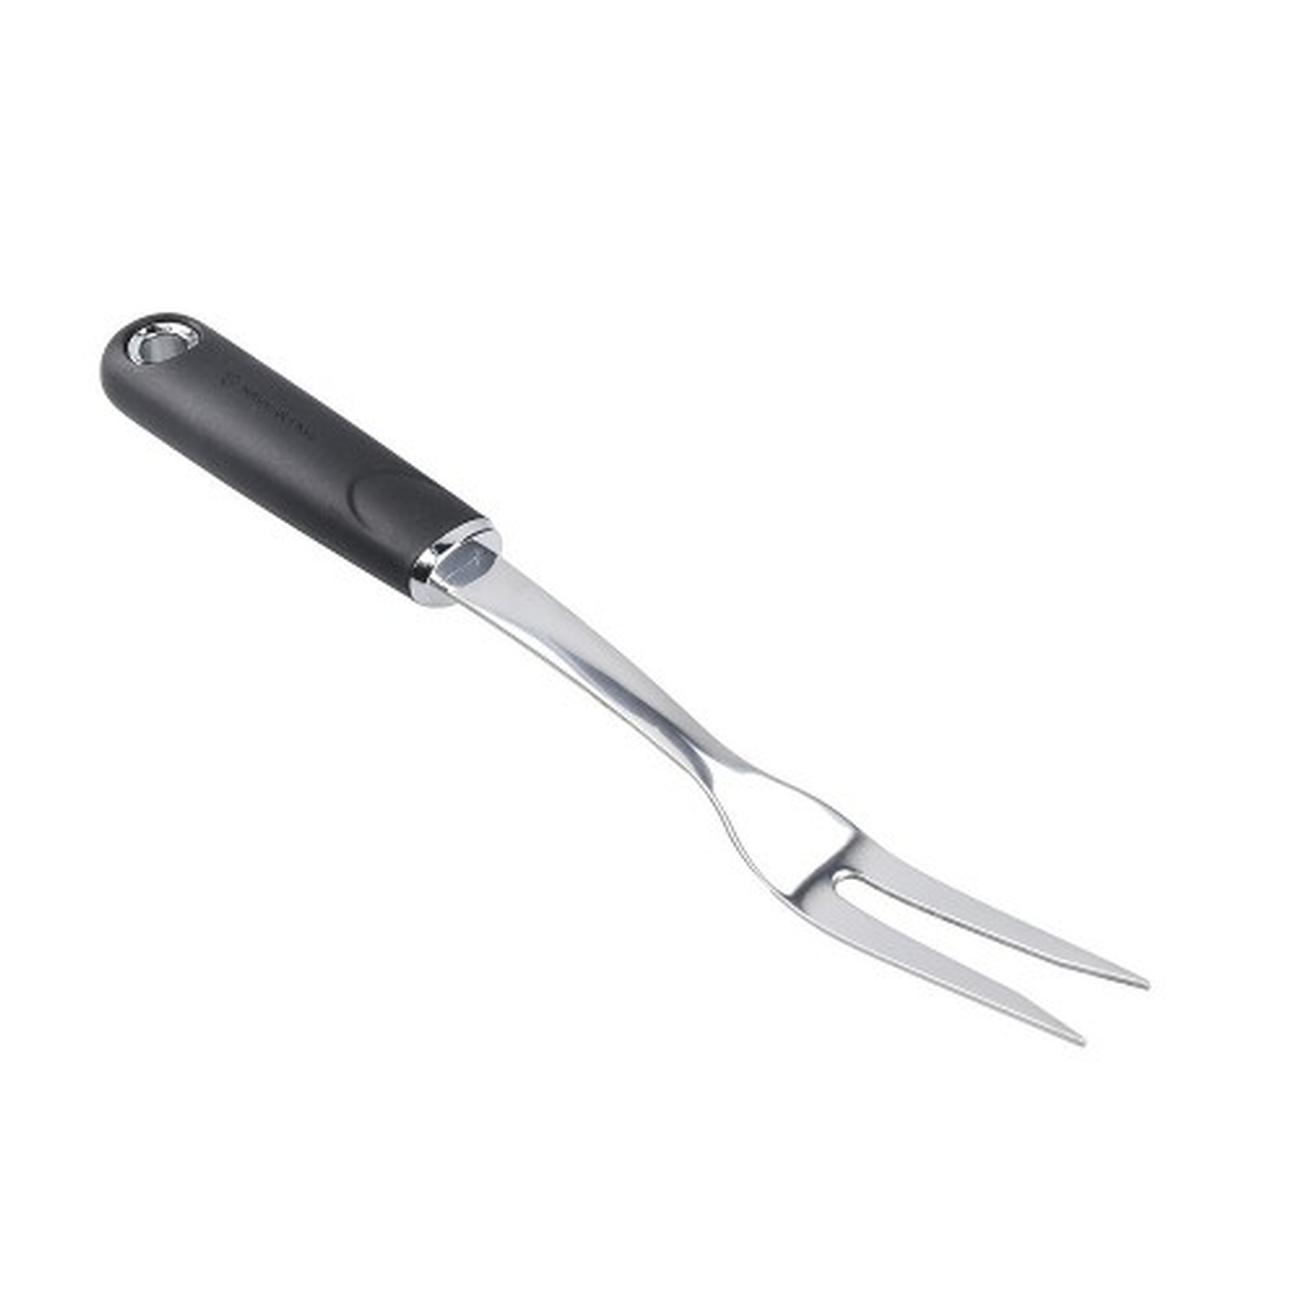 masterclass-softgrip-ss-carving-fork - MasterClass Soft Grip Stainless Steel Carving Fork